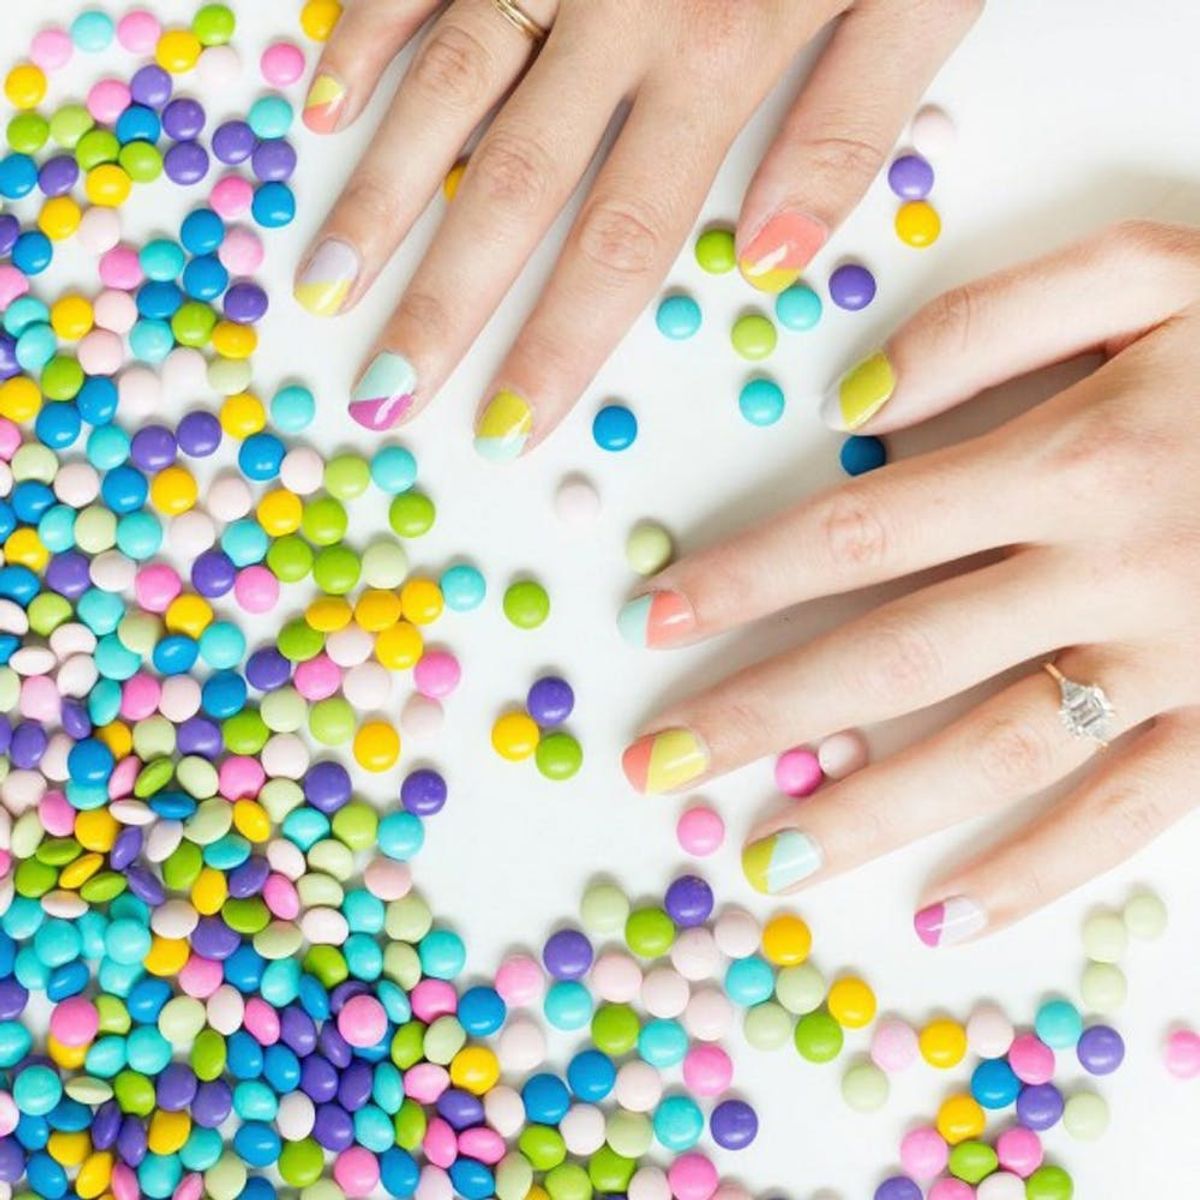 18 Pastel Manicures to Wear on Easter Weekend